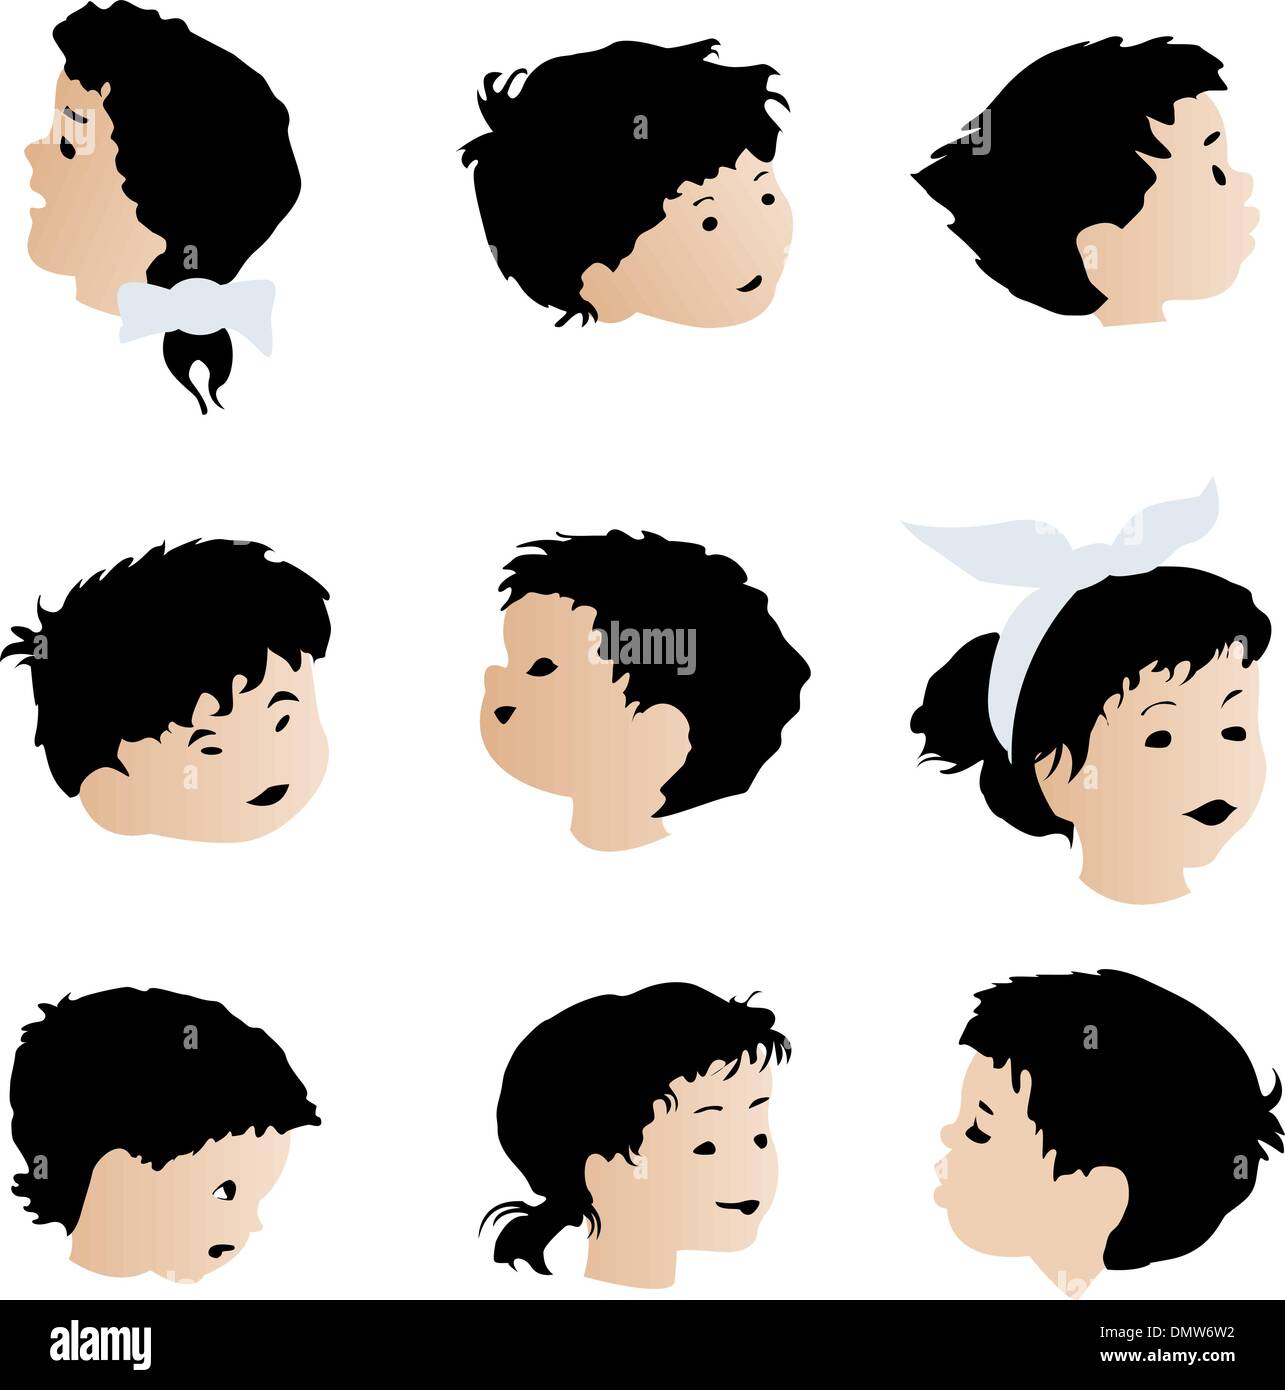 Children faces, expressions Stock Vector